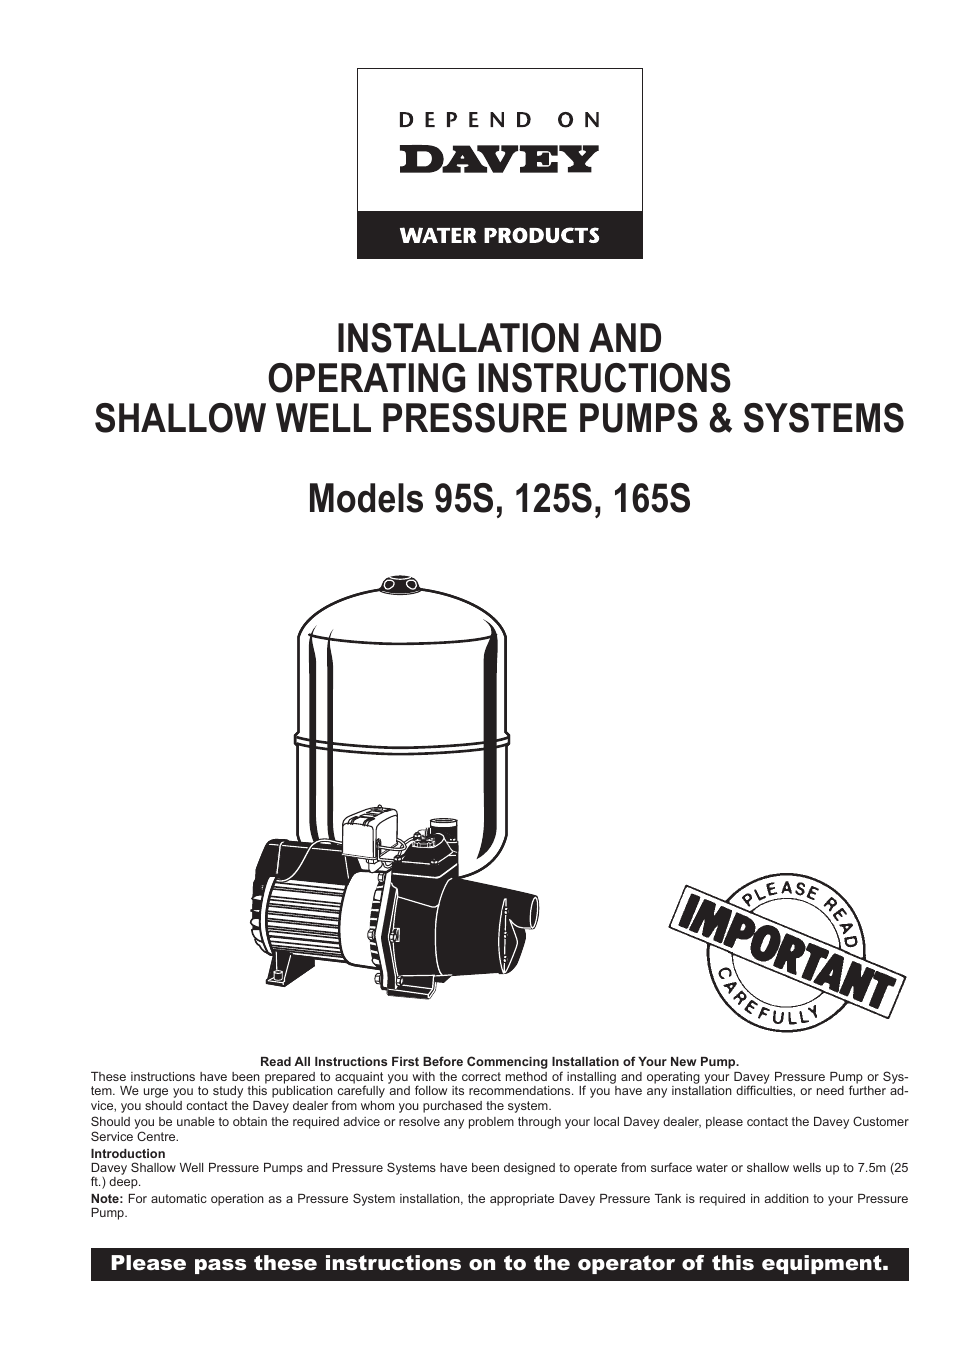 125S SHALLOW WELL PRESSURE PUMPS & SYSTEMS